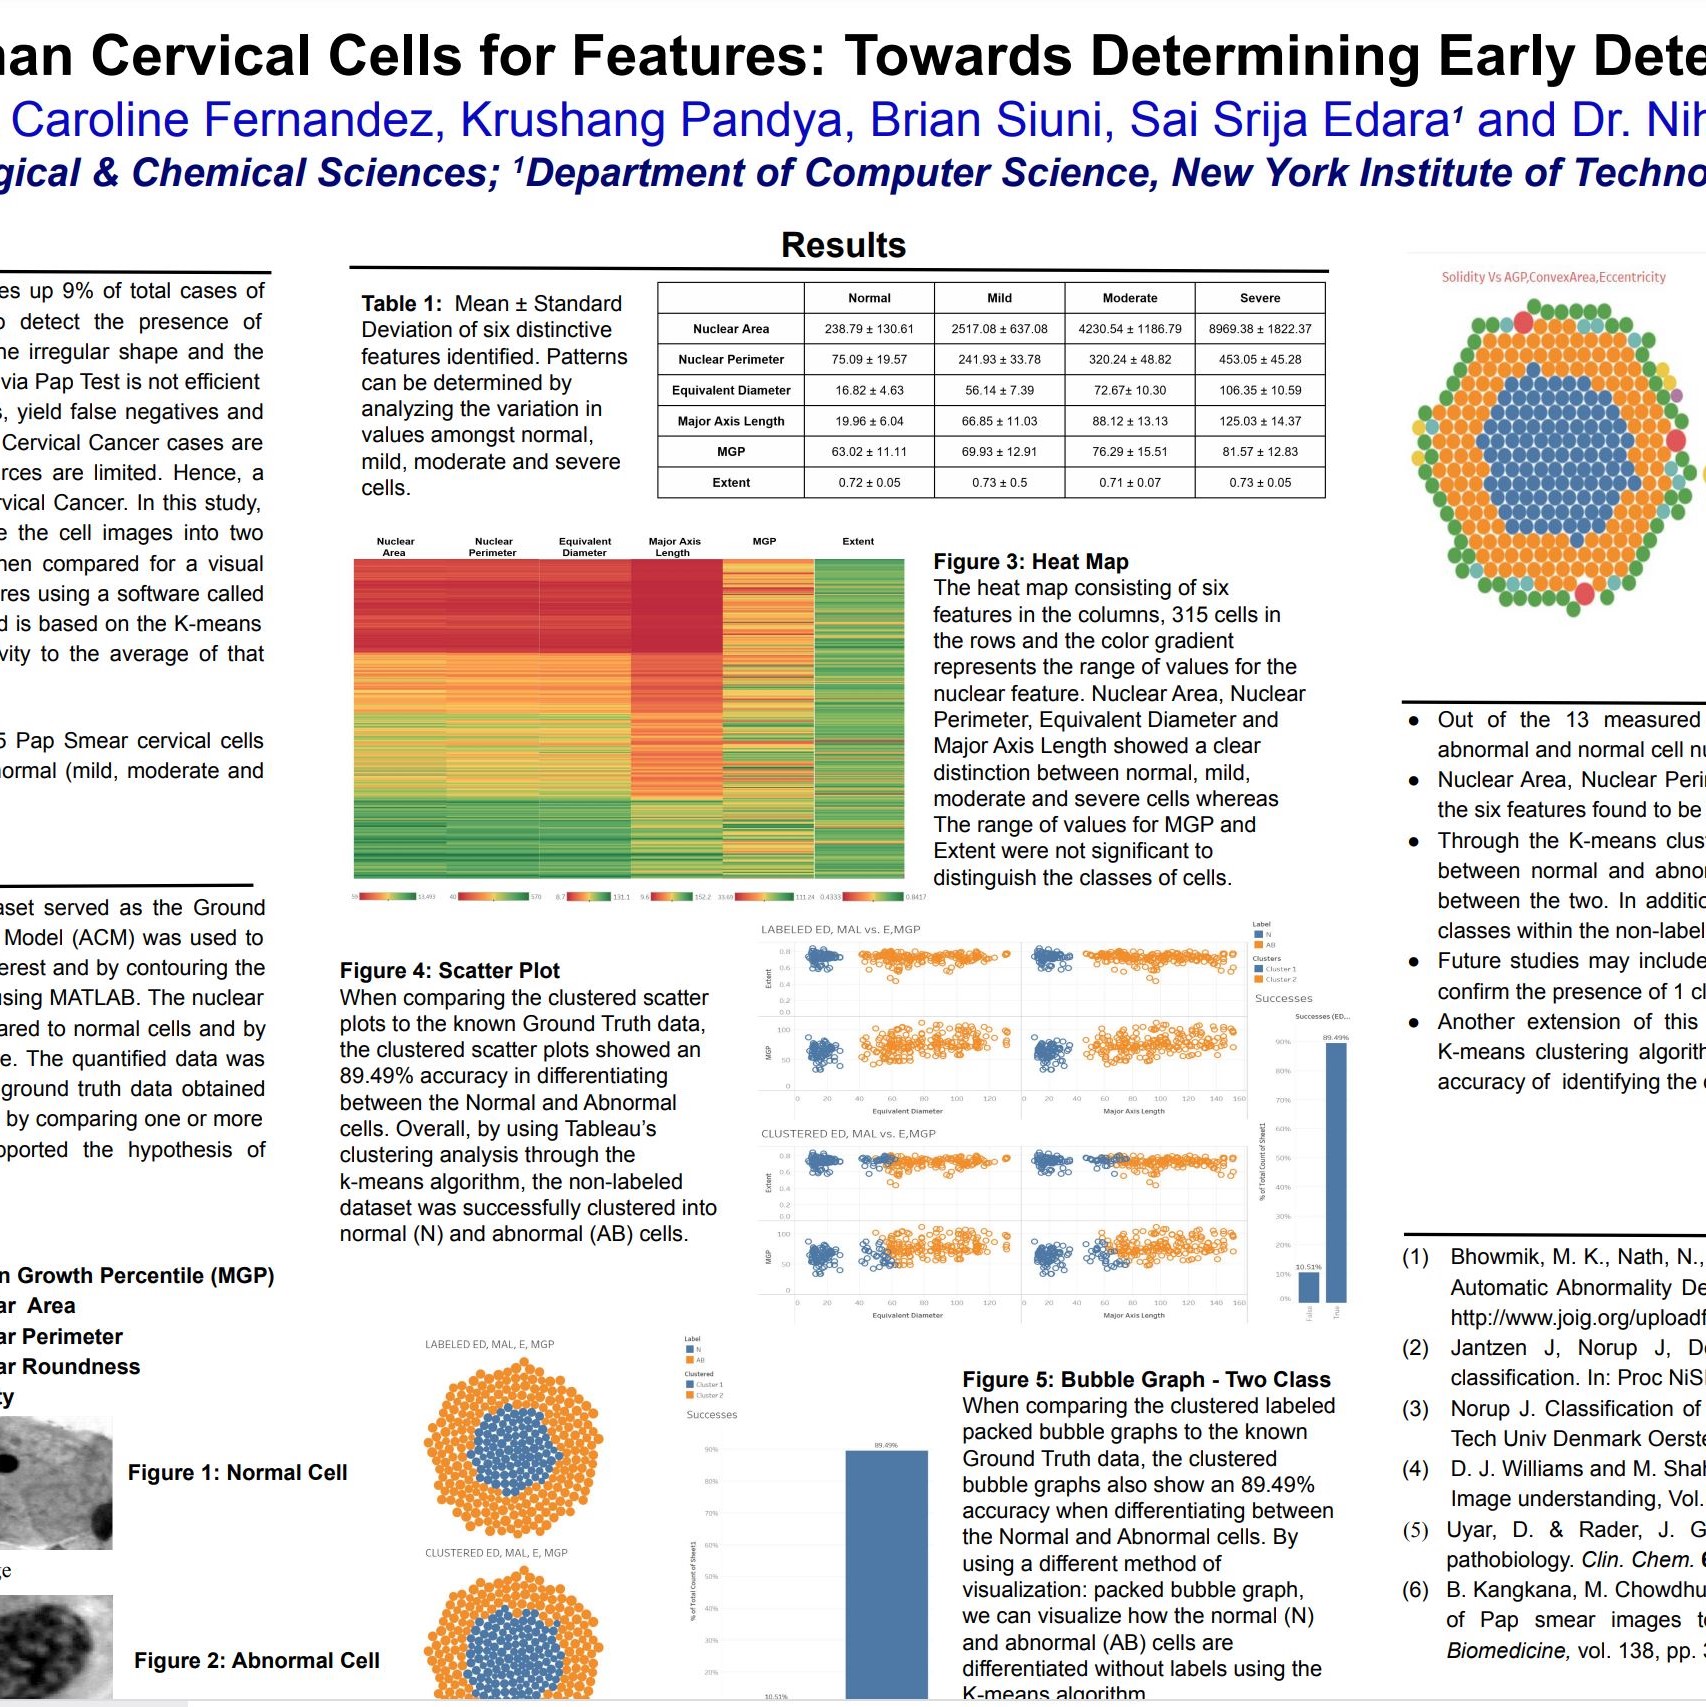 Image Analysis of Human Cervical Cells for Features: Towards Determining Early Detection of Cervical Cancer